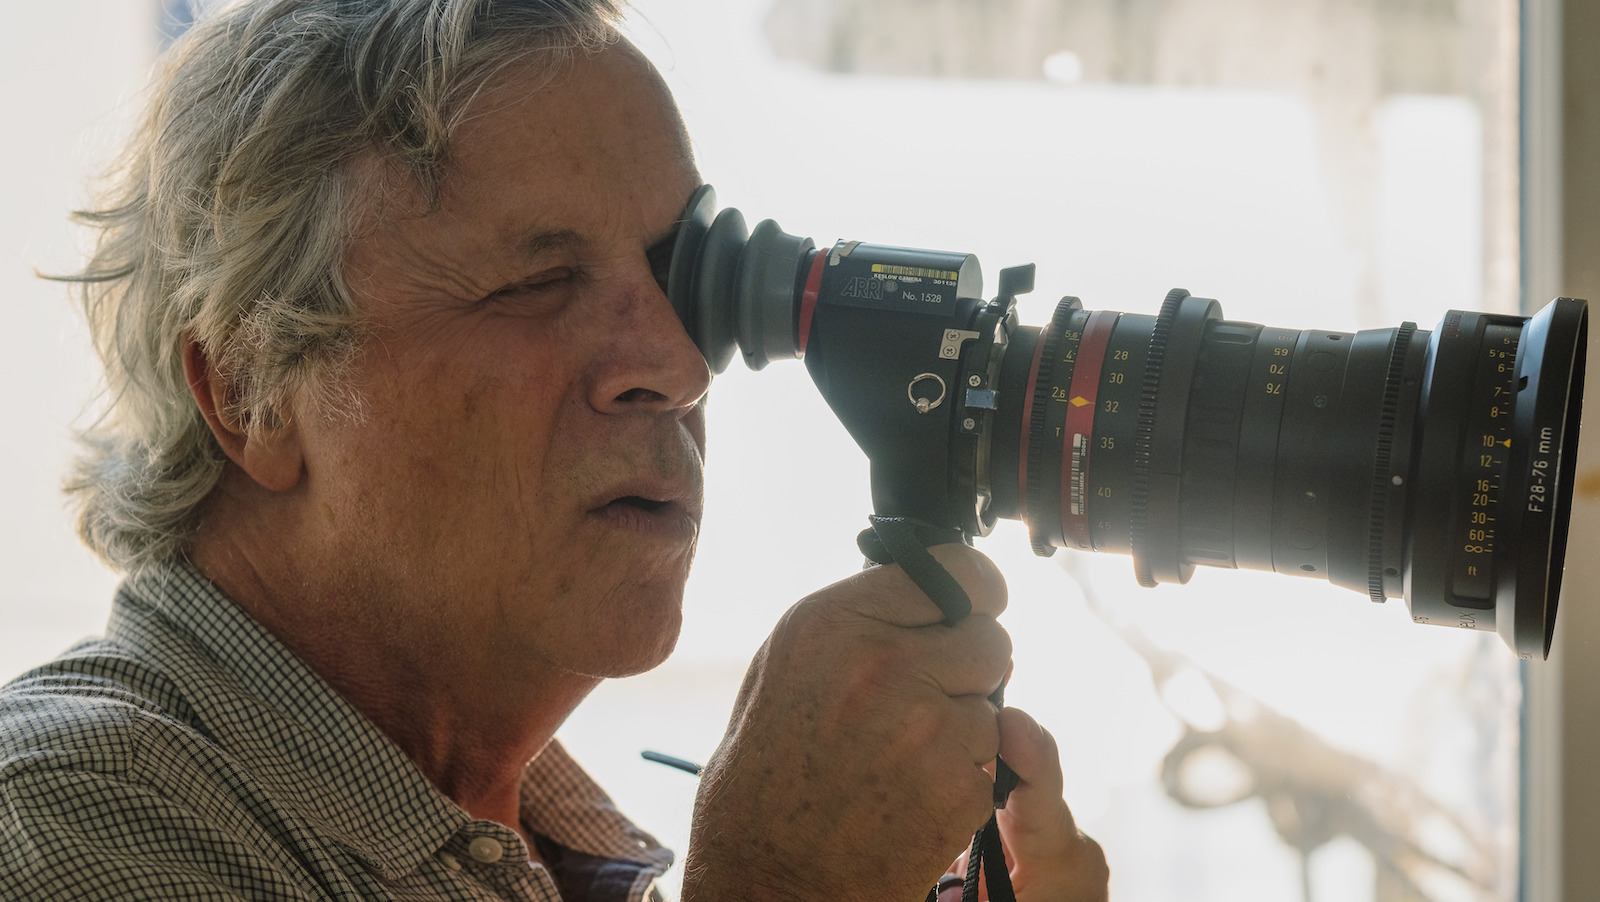 A man in profile looks through a camera viewfinder